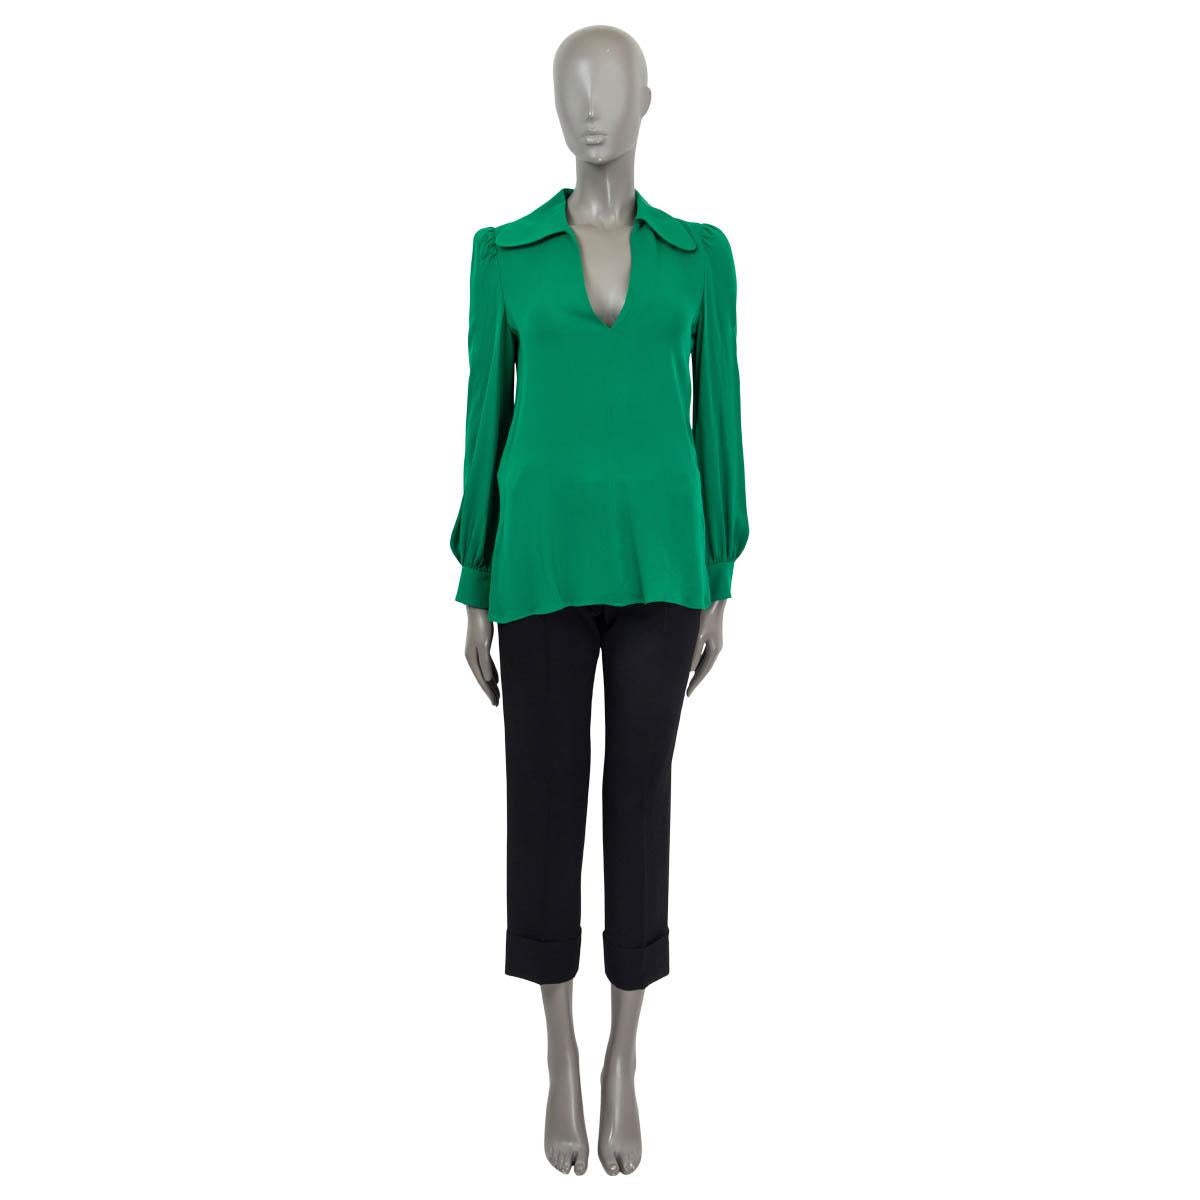 100% authentic Valentino Spring/Summer 2022 long sleeve blouse in green silk (100%). Features a spread collar, buttoned cuffs and a deep v-neck. Opens with a concealed zipper at the side. Unlined. Has been worn once or twice and is in excellent